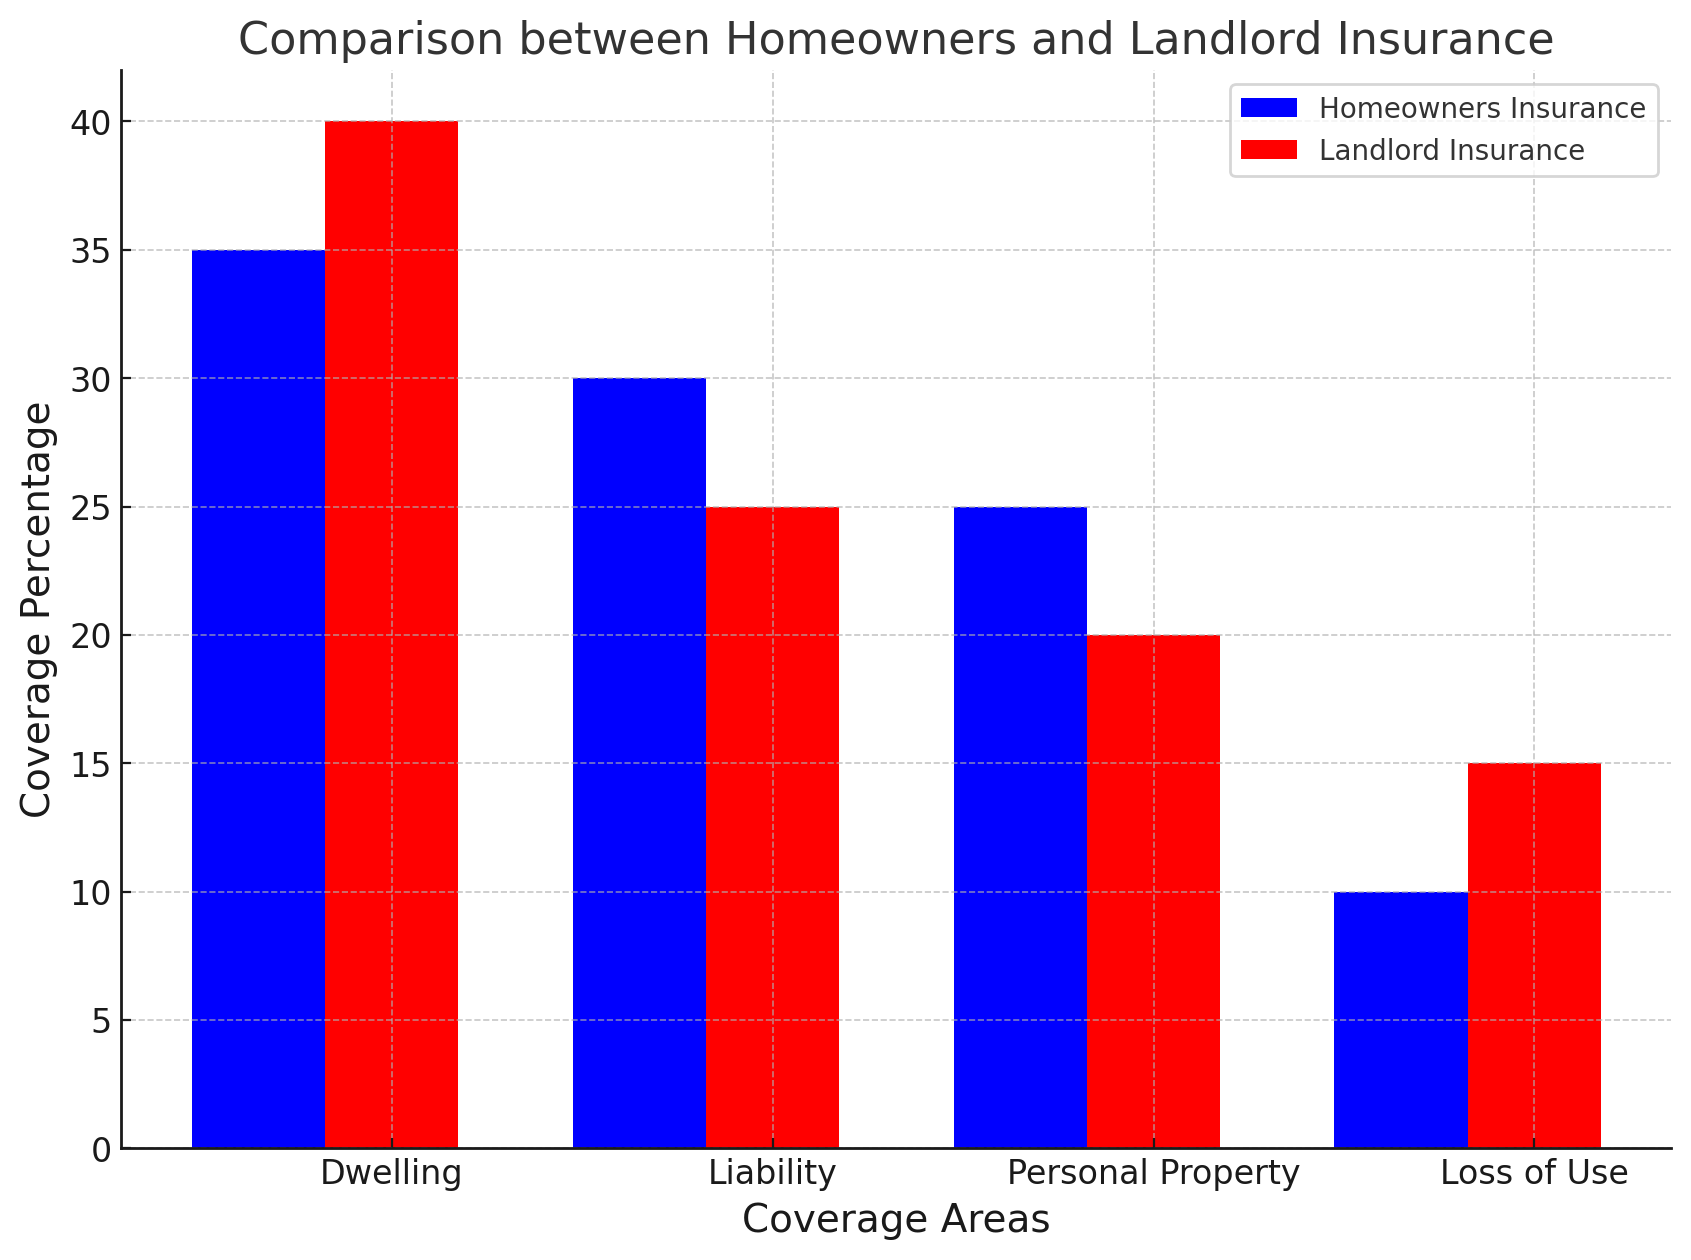 We Compare Homeowners Insurance to Landlord Insurance